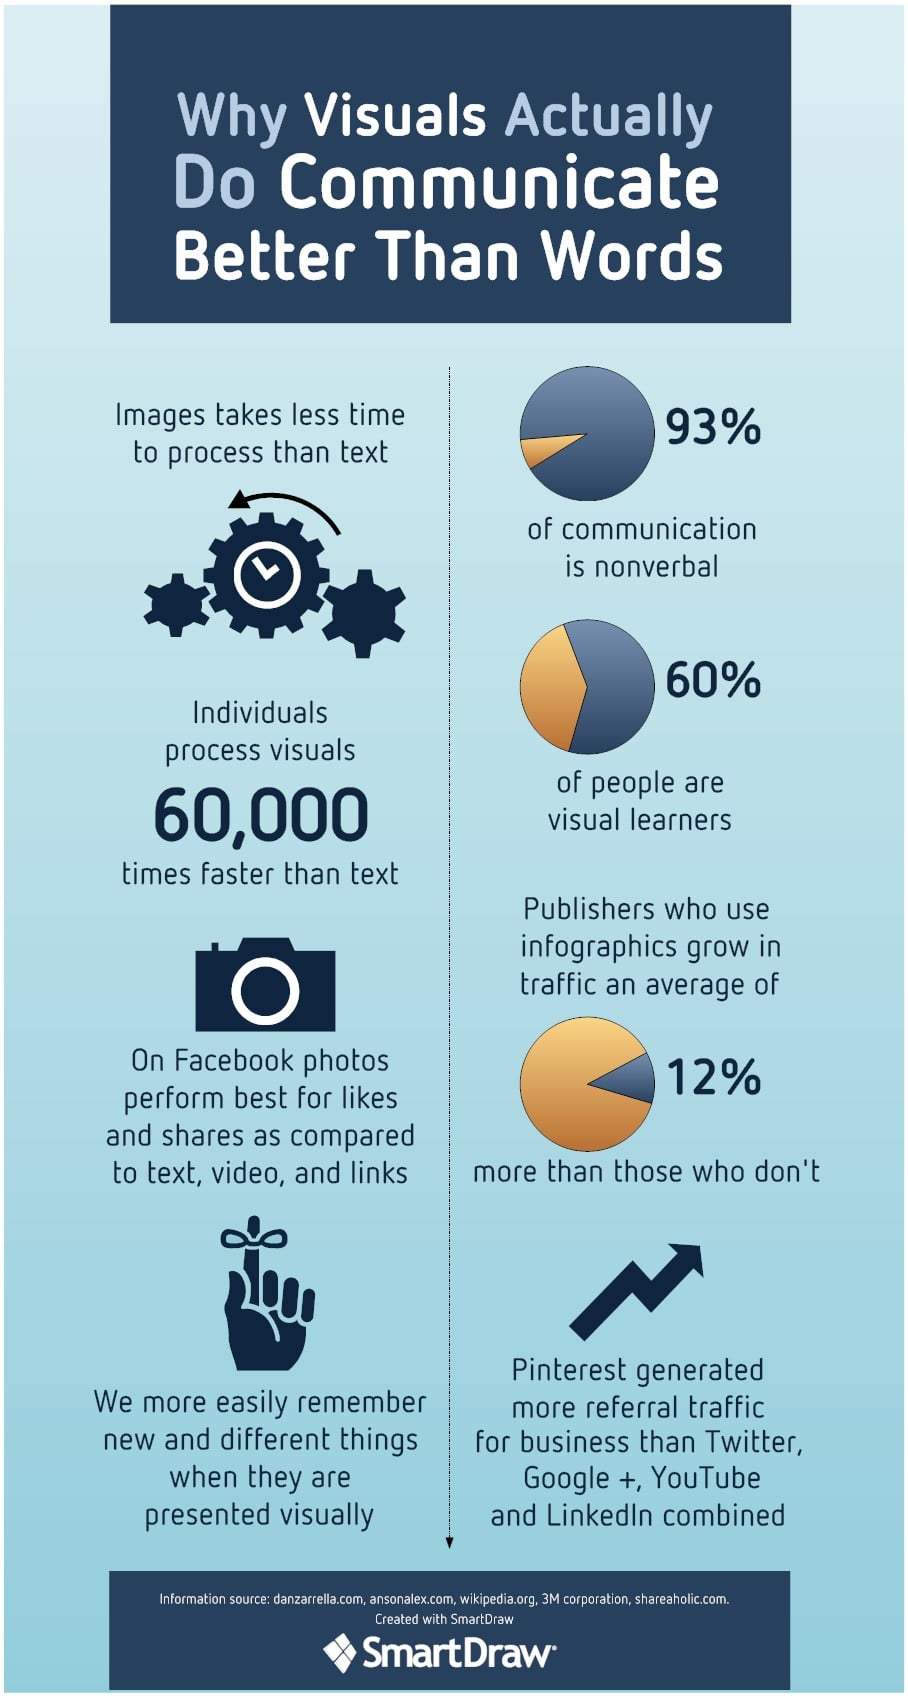 Why do people love visual more than text?